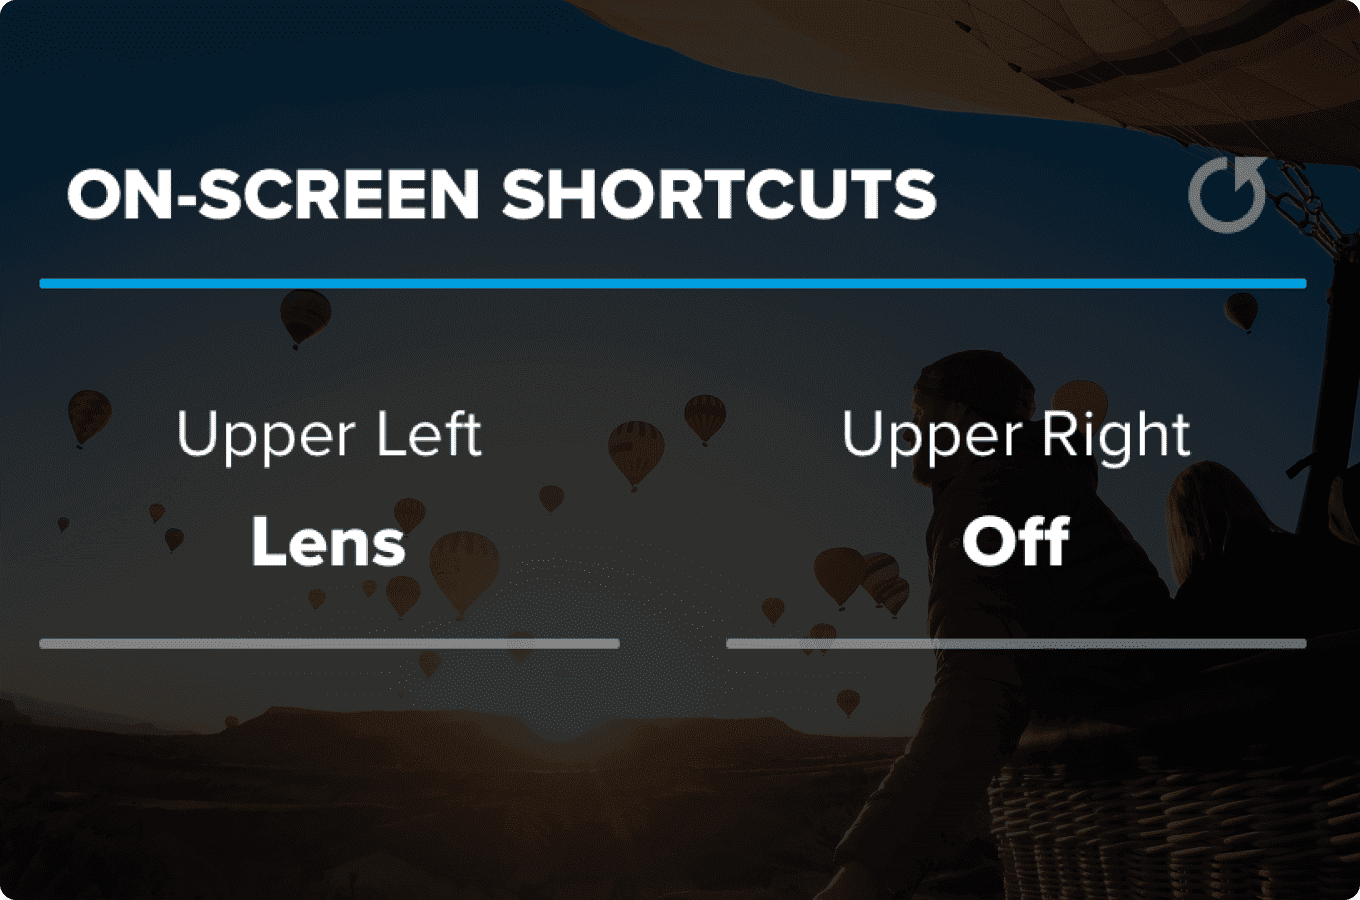 On-screen shortcuts get you to your favorite features with ease.
